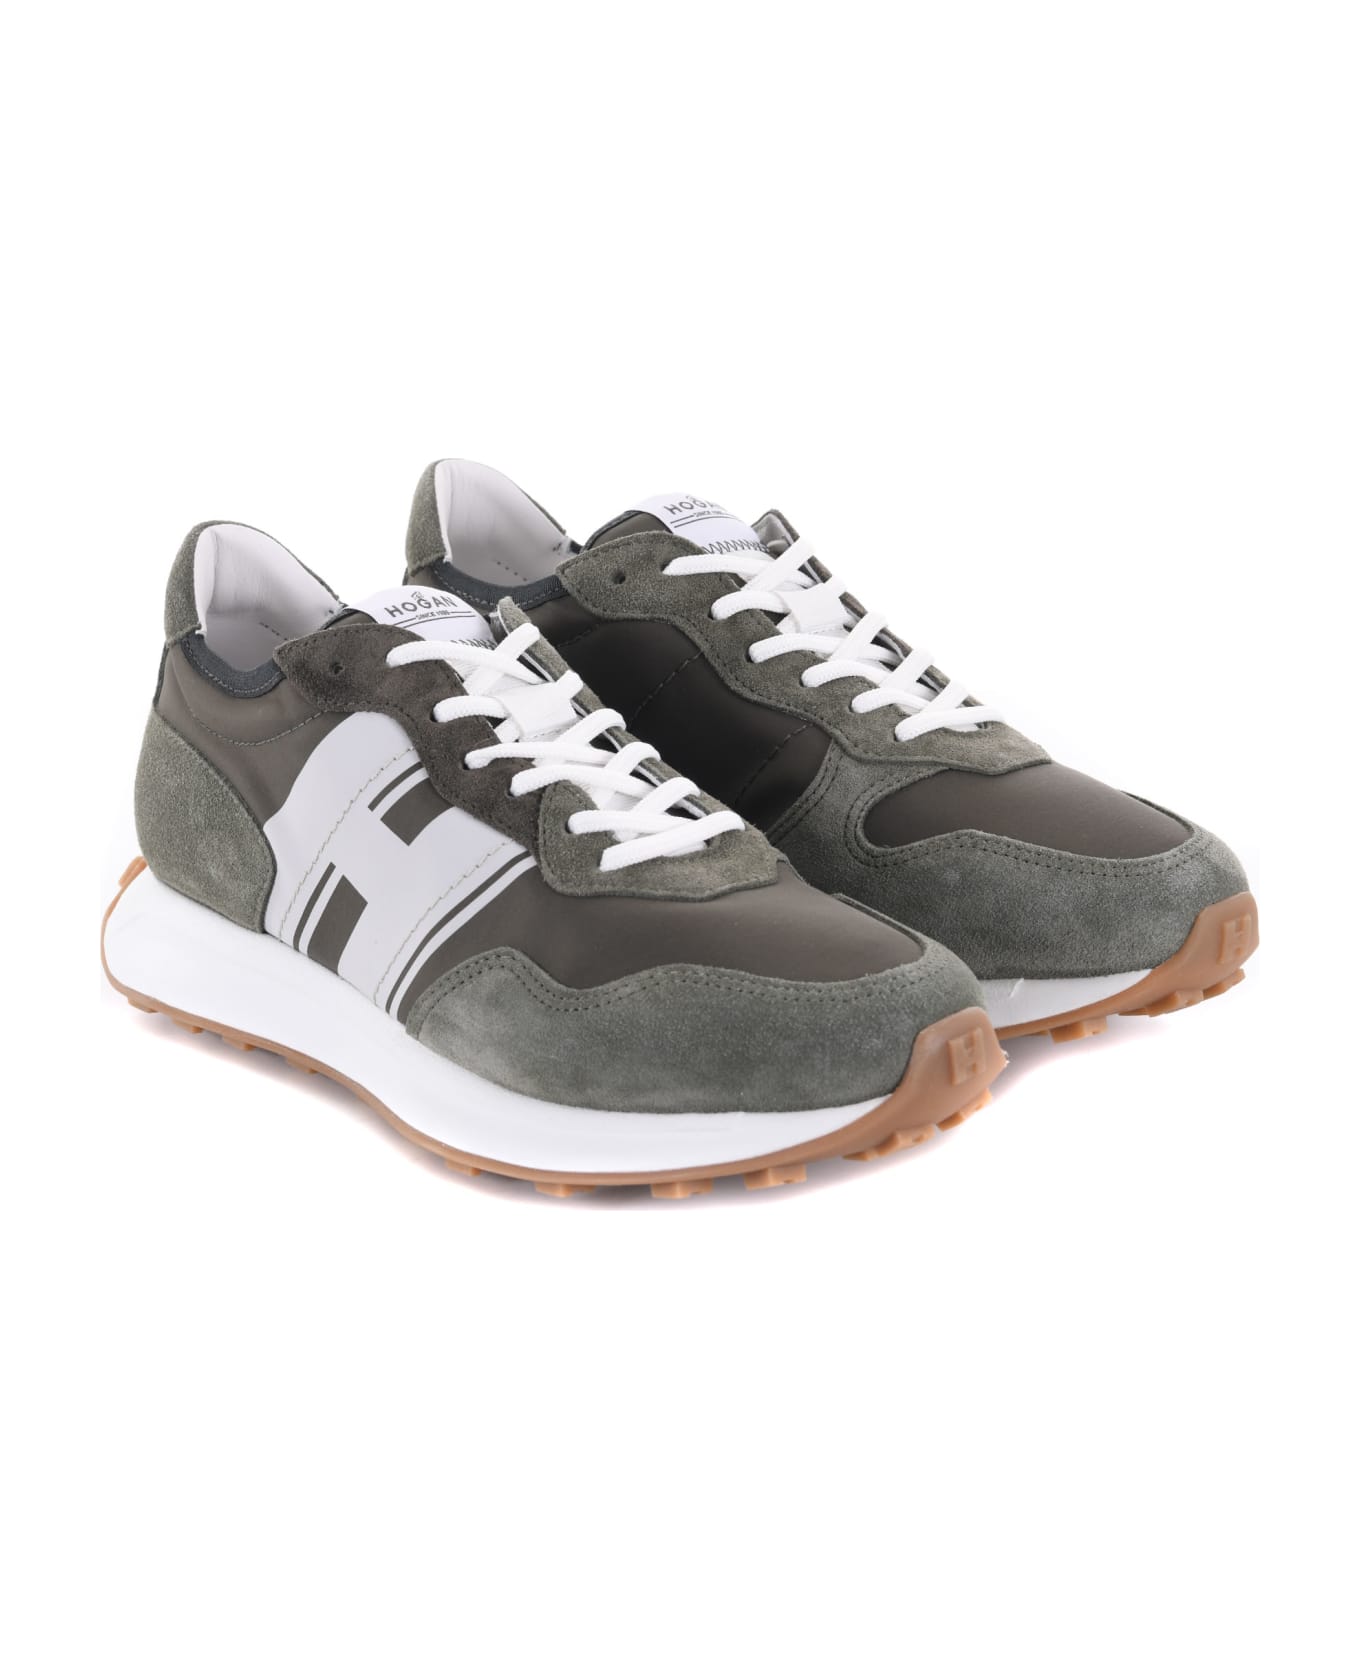 Hogan Sneakers In Suede And Nylon - Verde militare